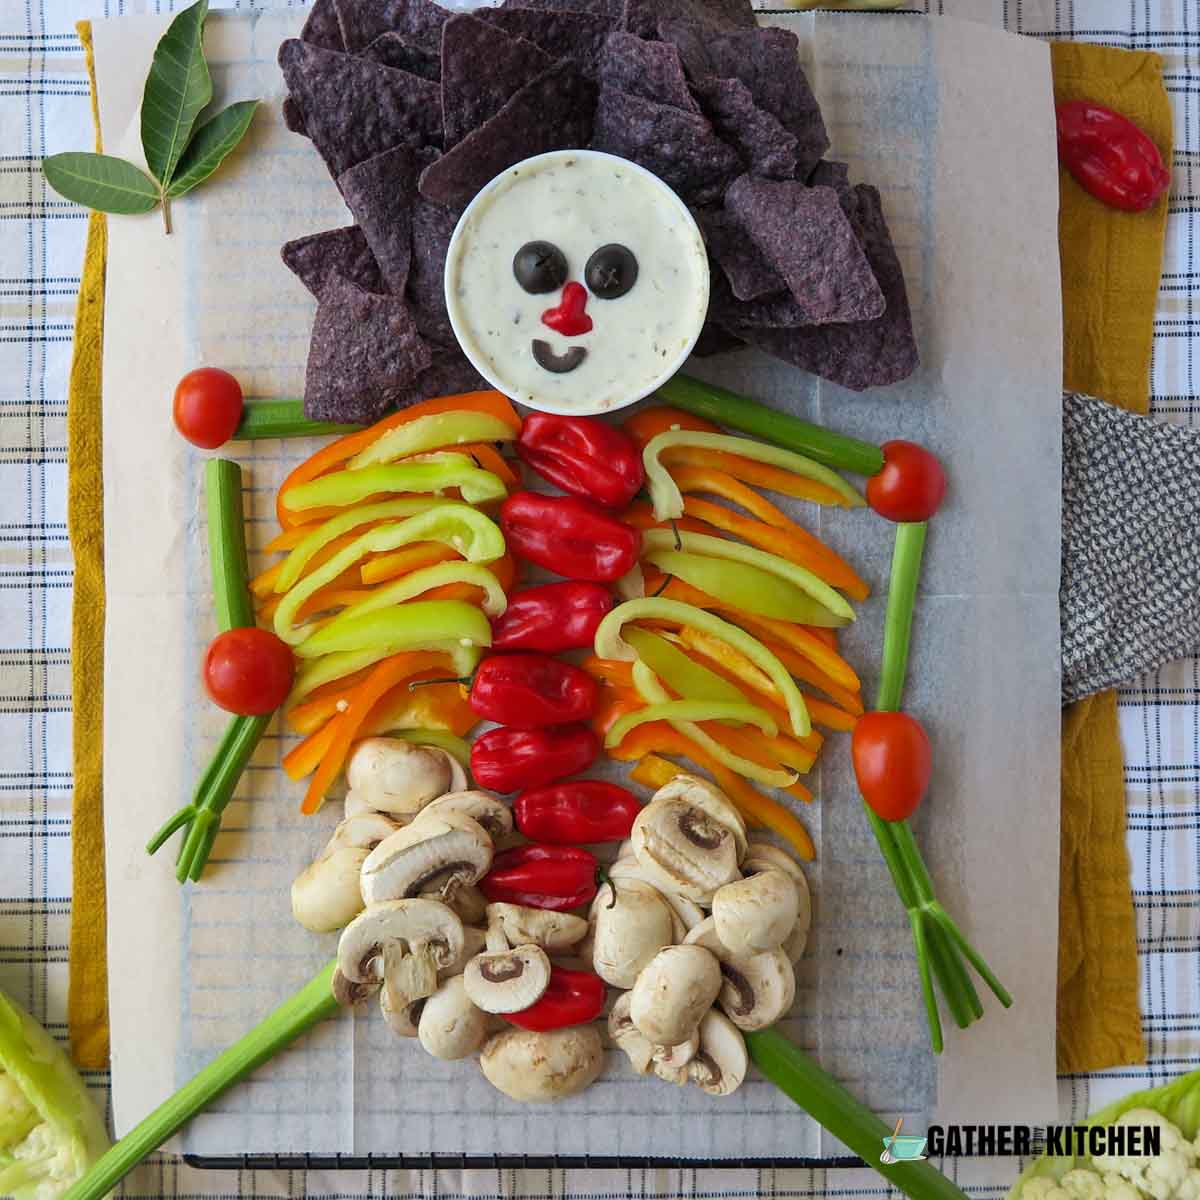 Top down of a fully assembled veggie skeleton.